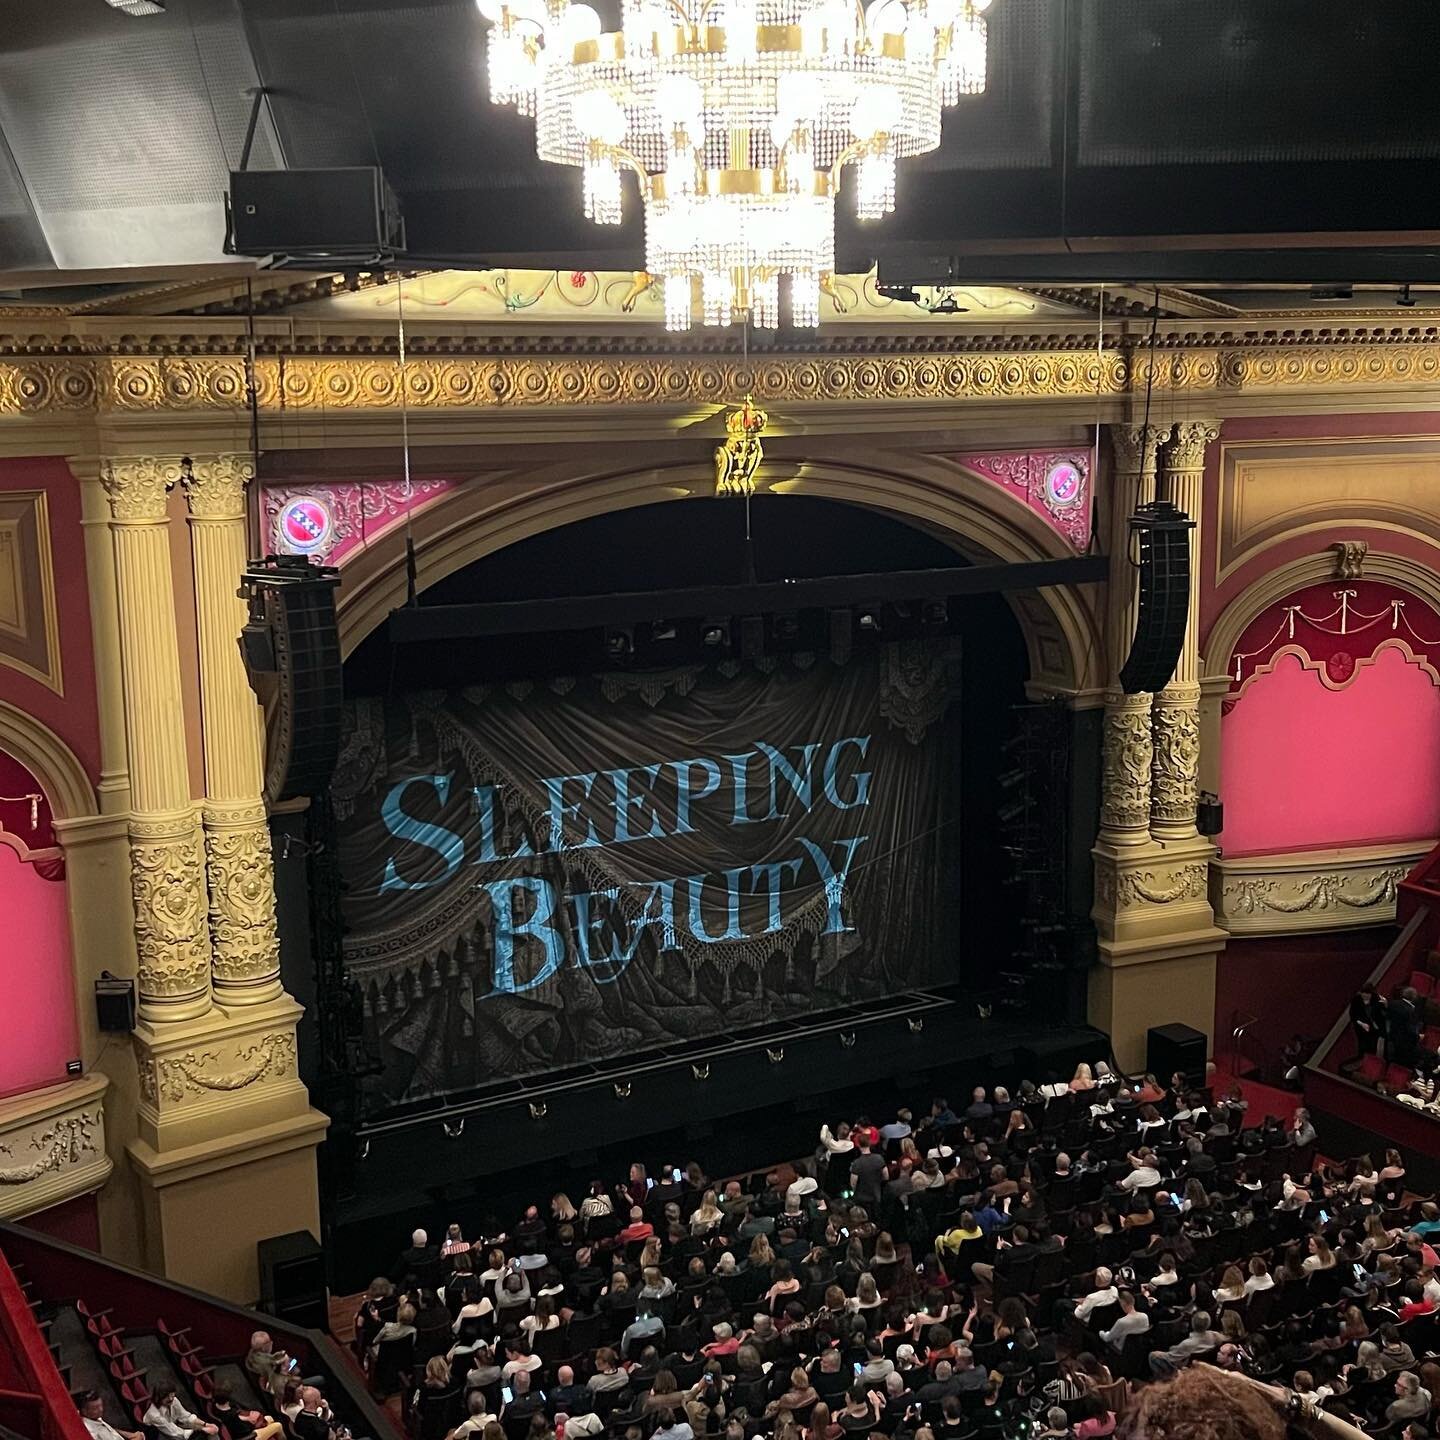 I went to my first ever ballet yesterday, Matthew Bourne&rsquo;s &ldquo;Sleeping Beauty -A Gothic Romance&rdquo;. What an incredible show. Had no idea what to expect, but was blown away. And it&rsquo;s always a treat to see a show at the beautiful @t